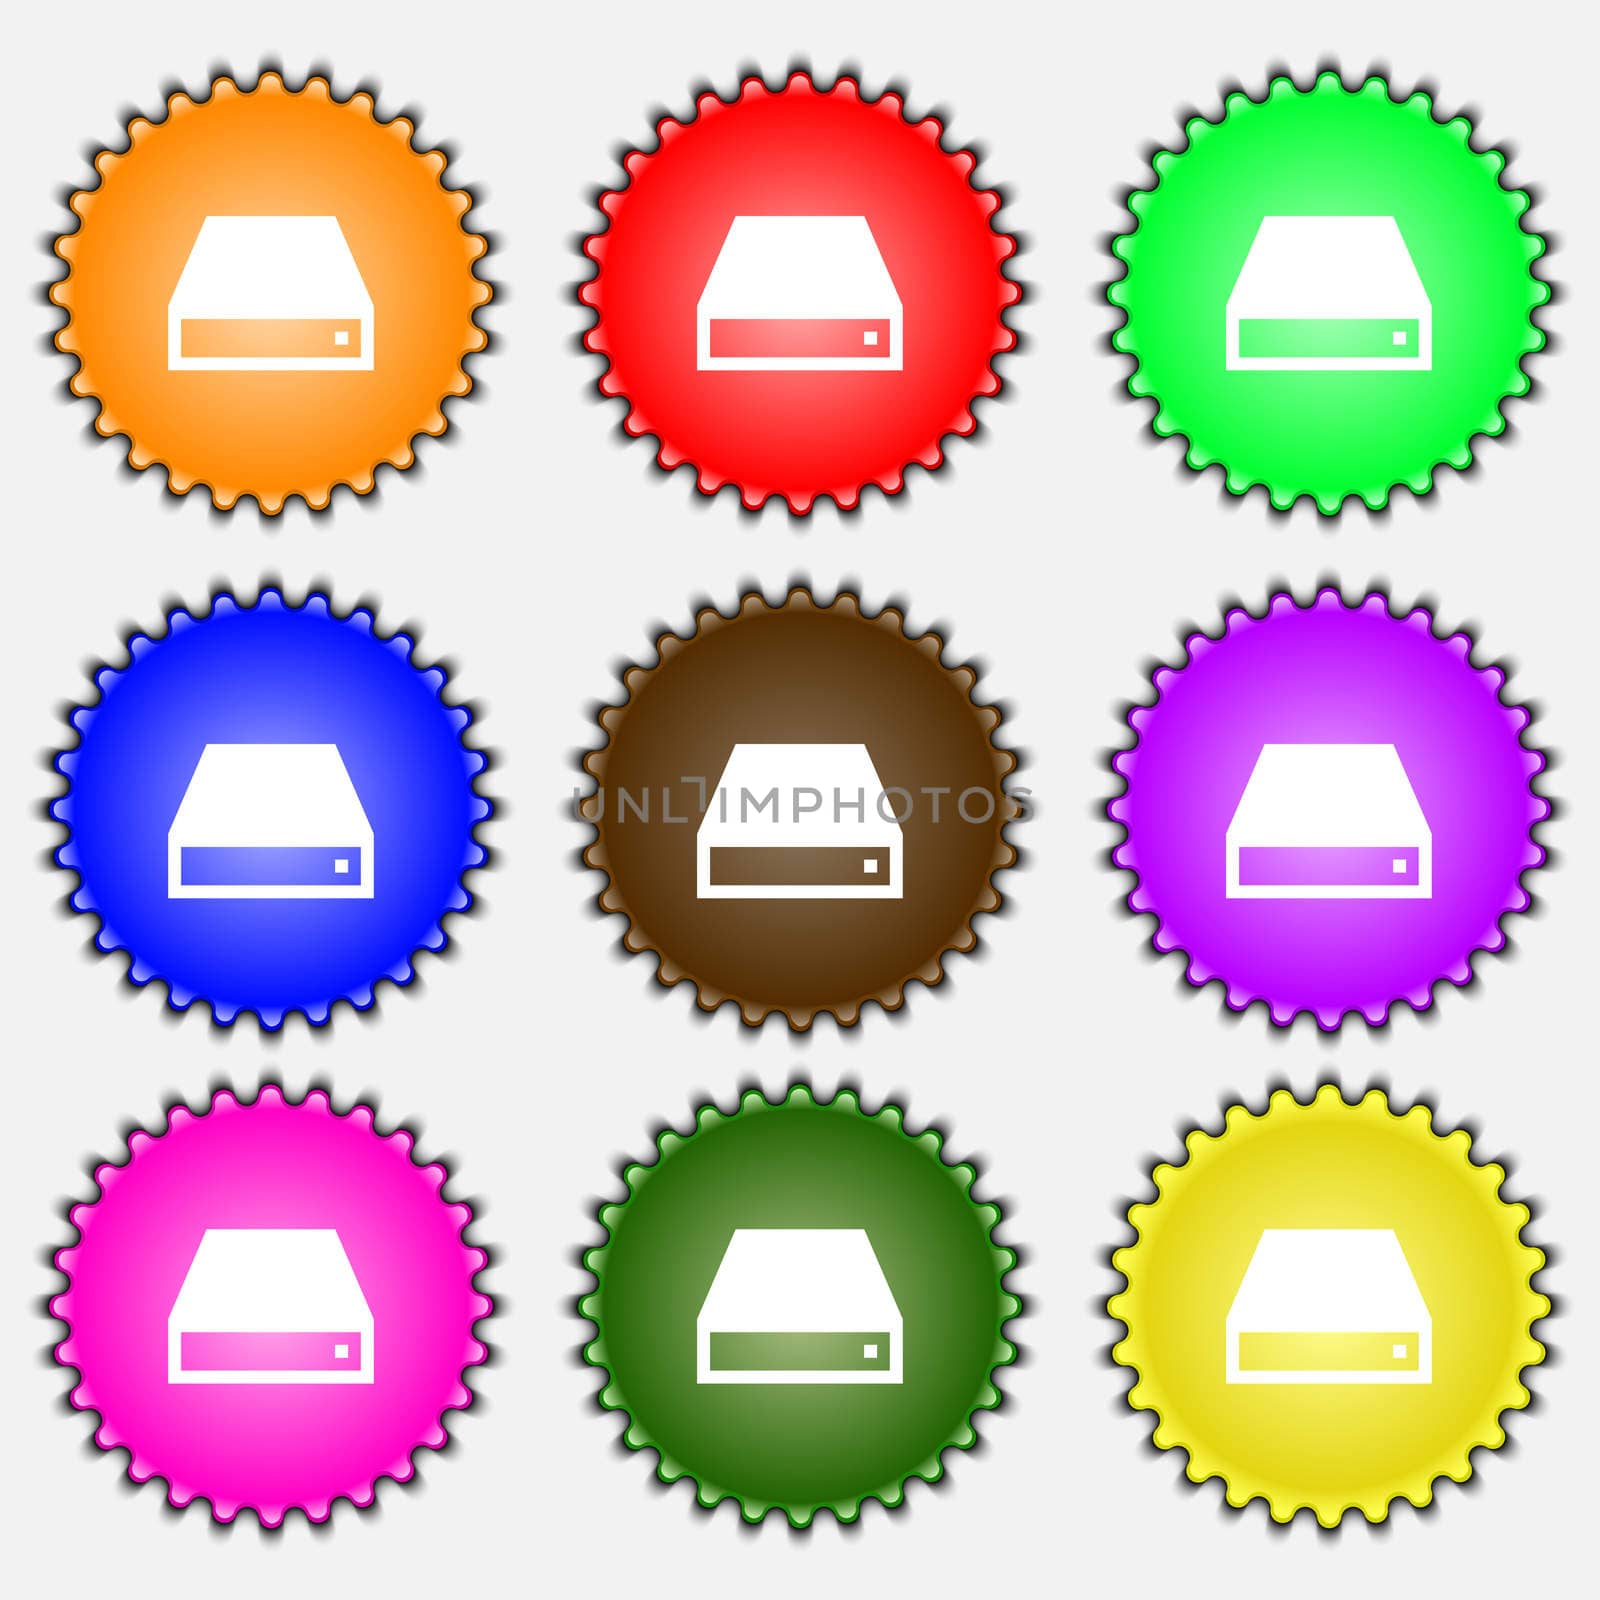 CD-ROM icon sign. A set of nine different colored labels. illustration 